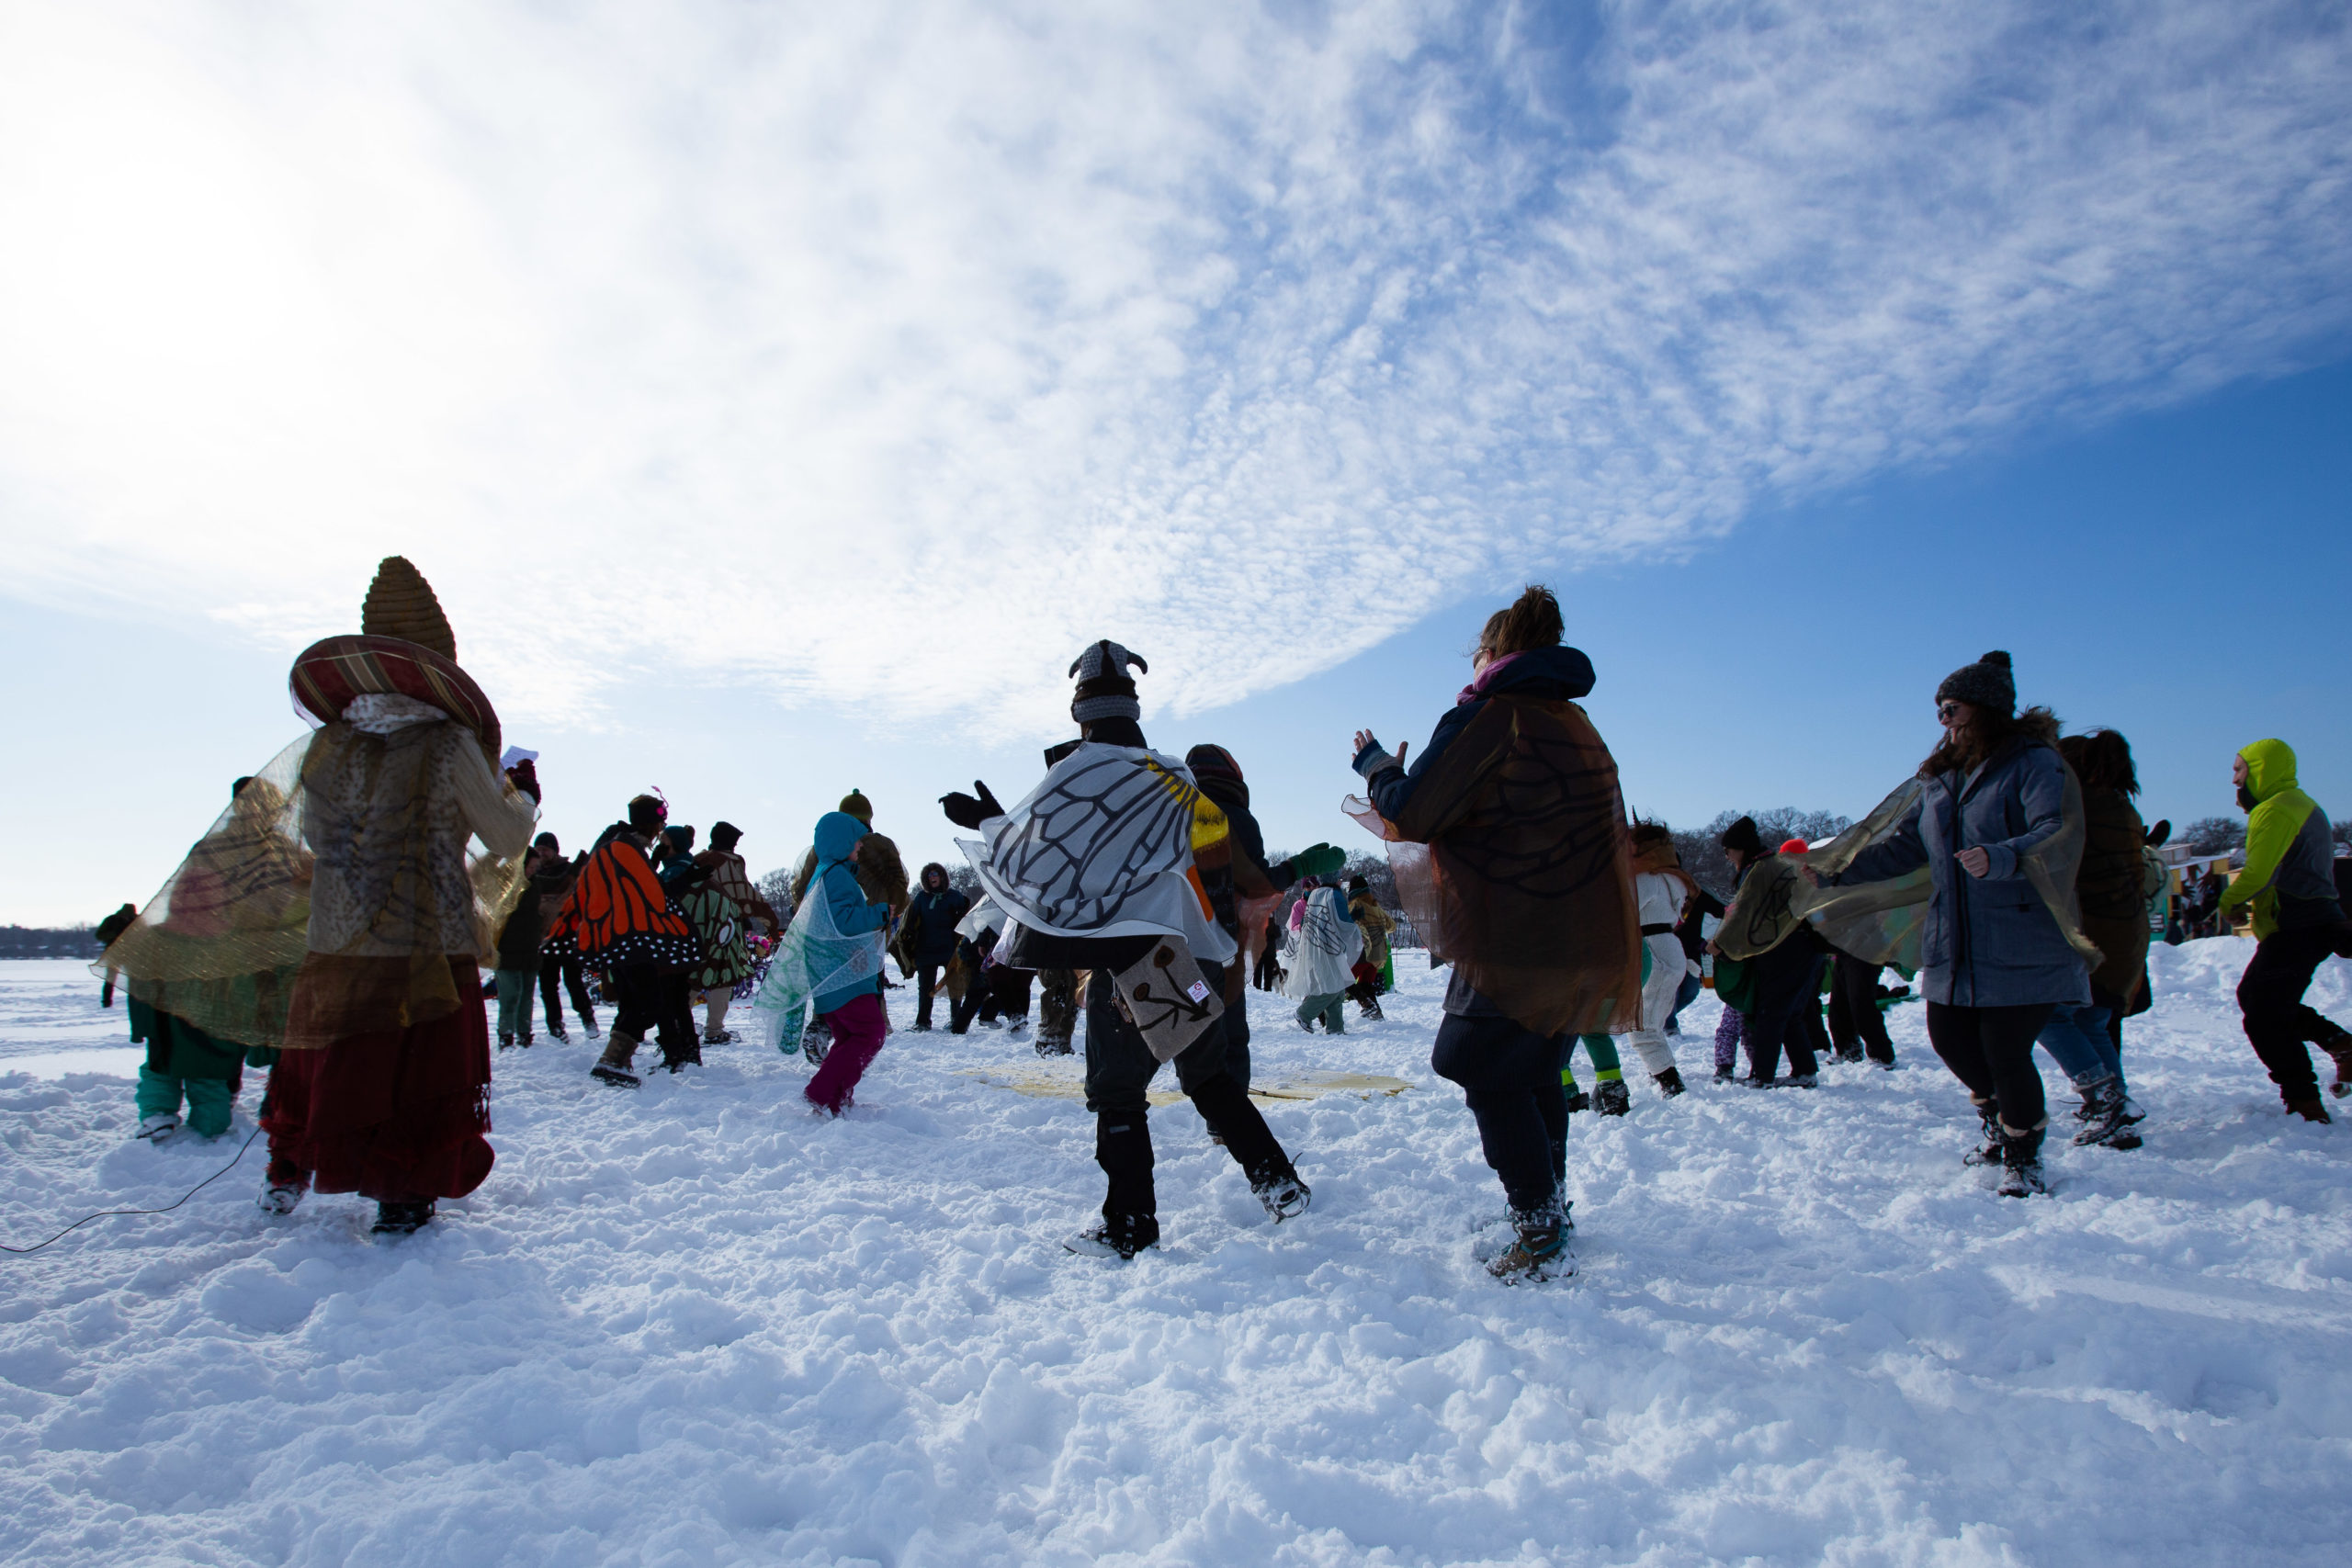 A group of adults dance in the trampled snow, in a circular formation, facing the center. Some wear butterfly wings on their bundled up bodies.